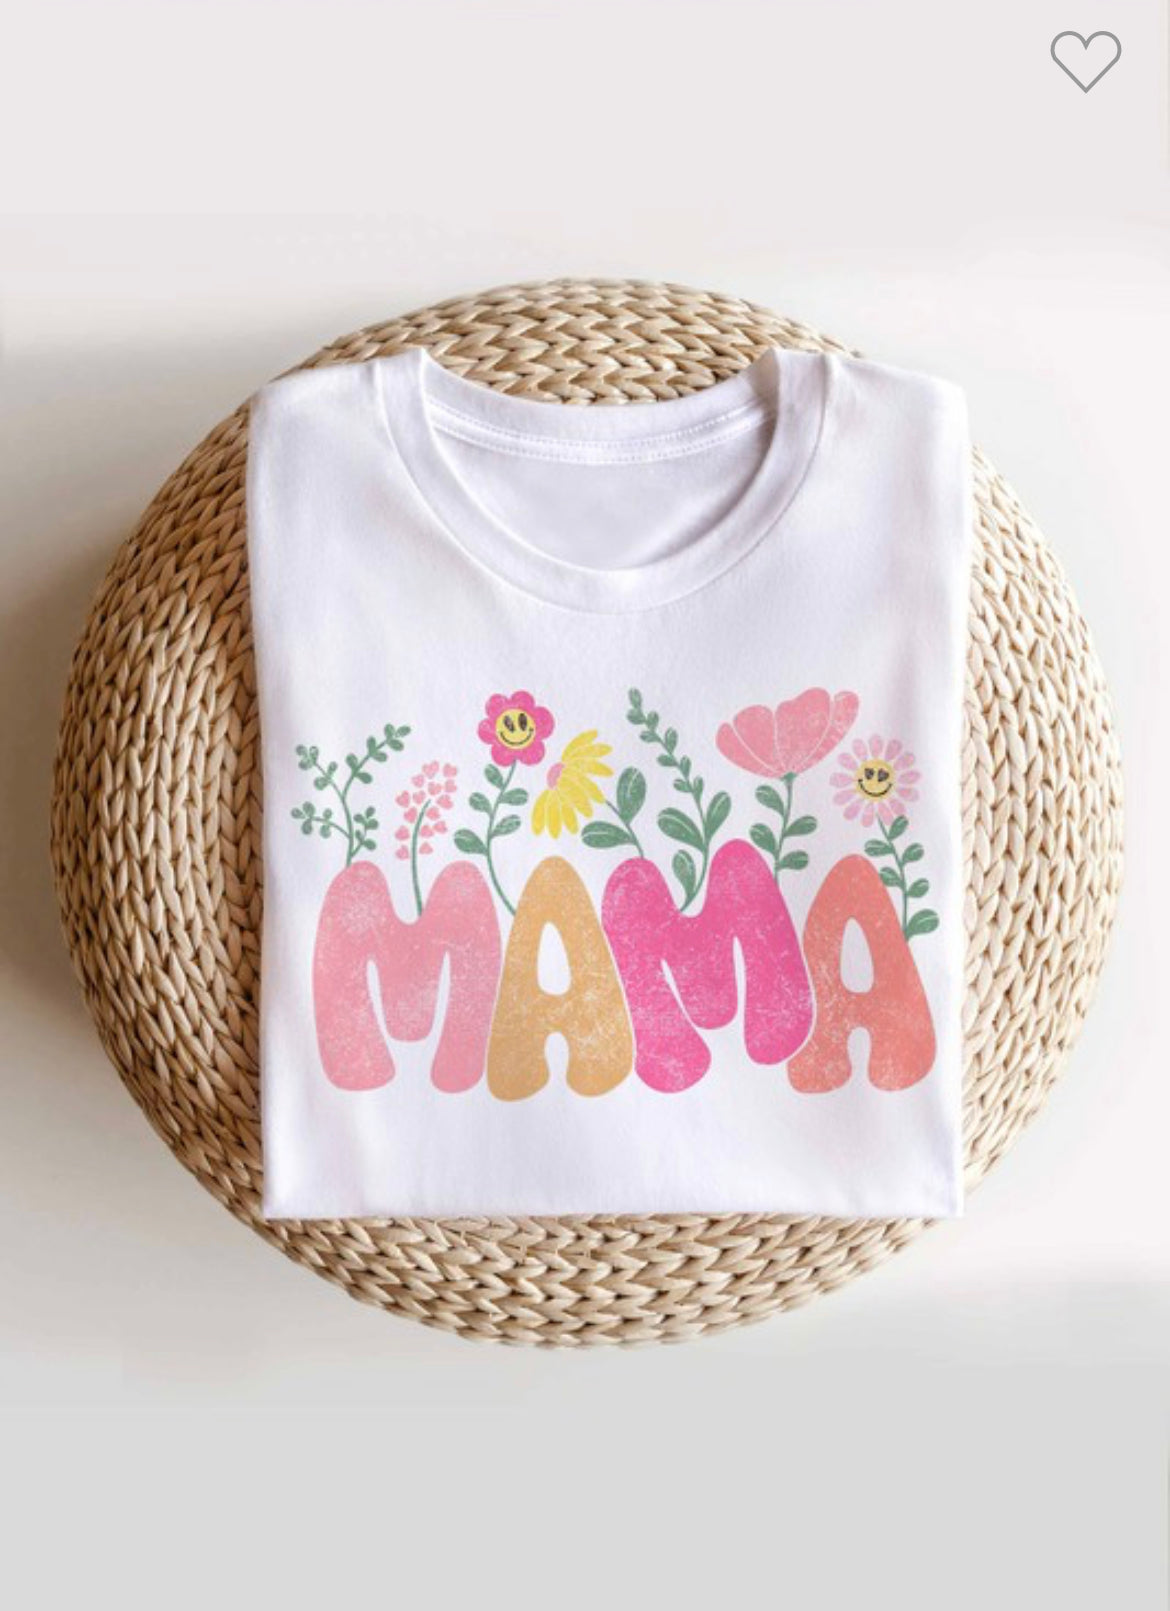 Mama Floral Graphic Tee